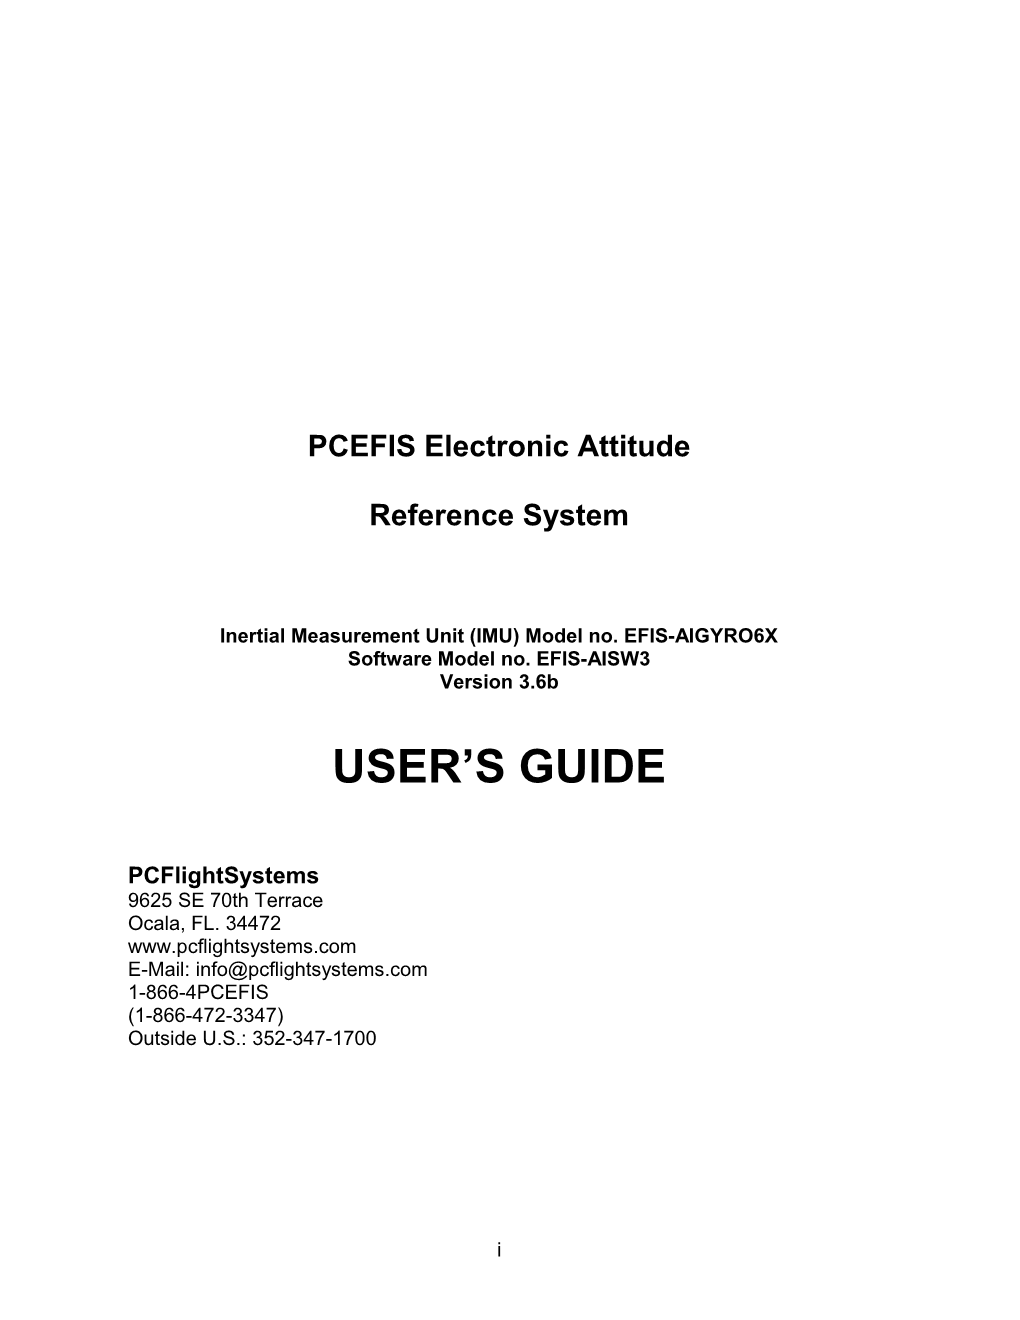 PCEFIS Electronic Attitude Reference System